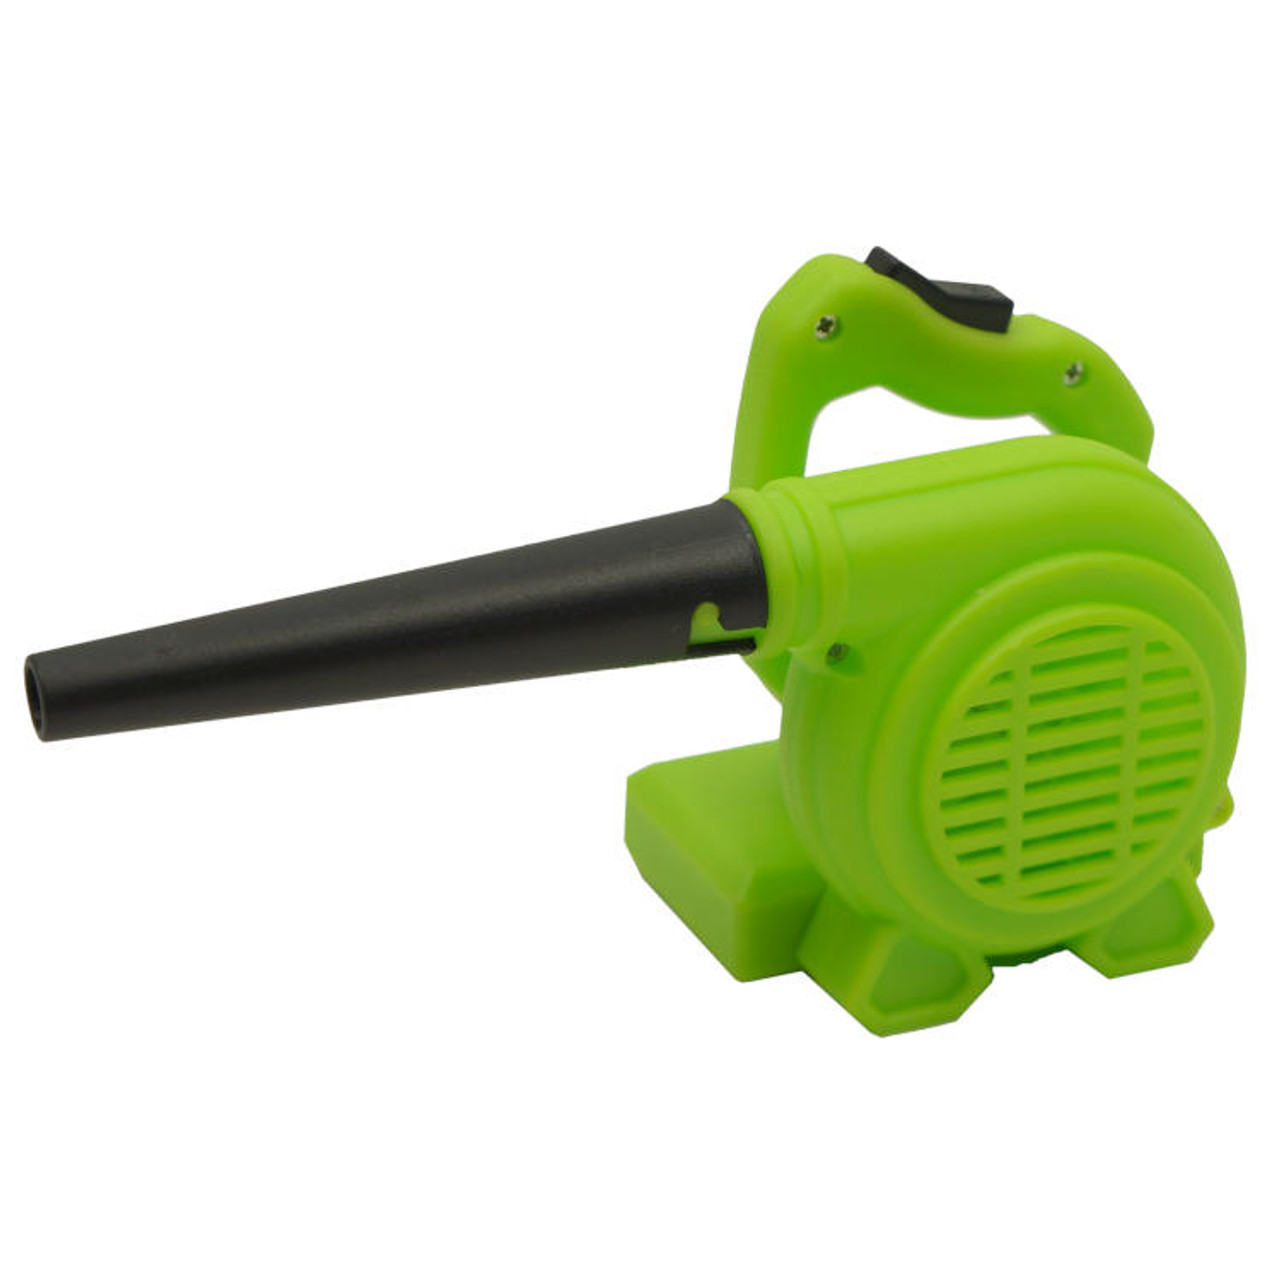 World smallest blower (by Westminster) Dual Power - Battery and USB